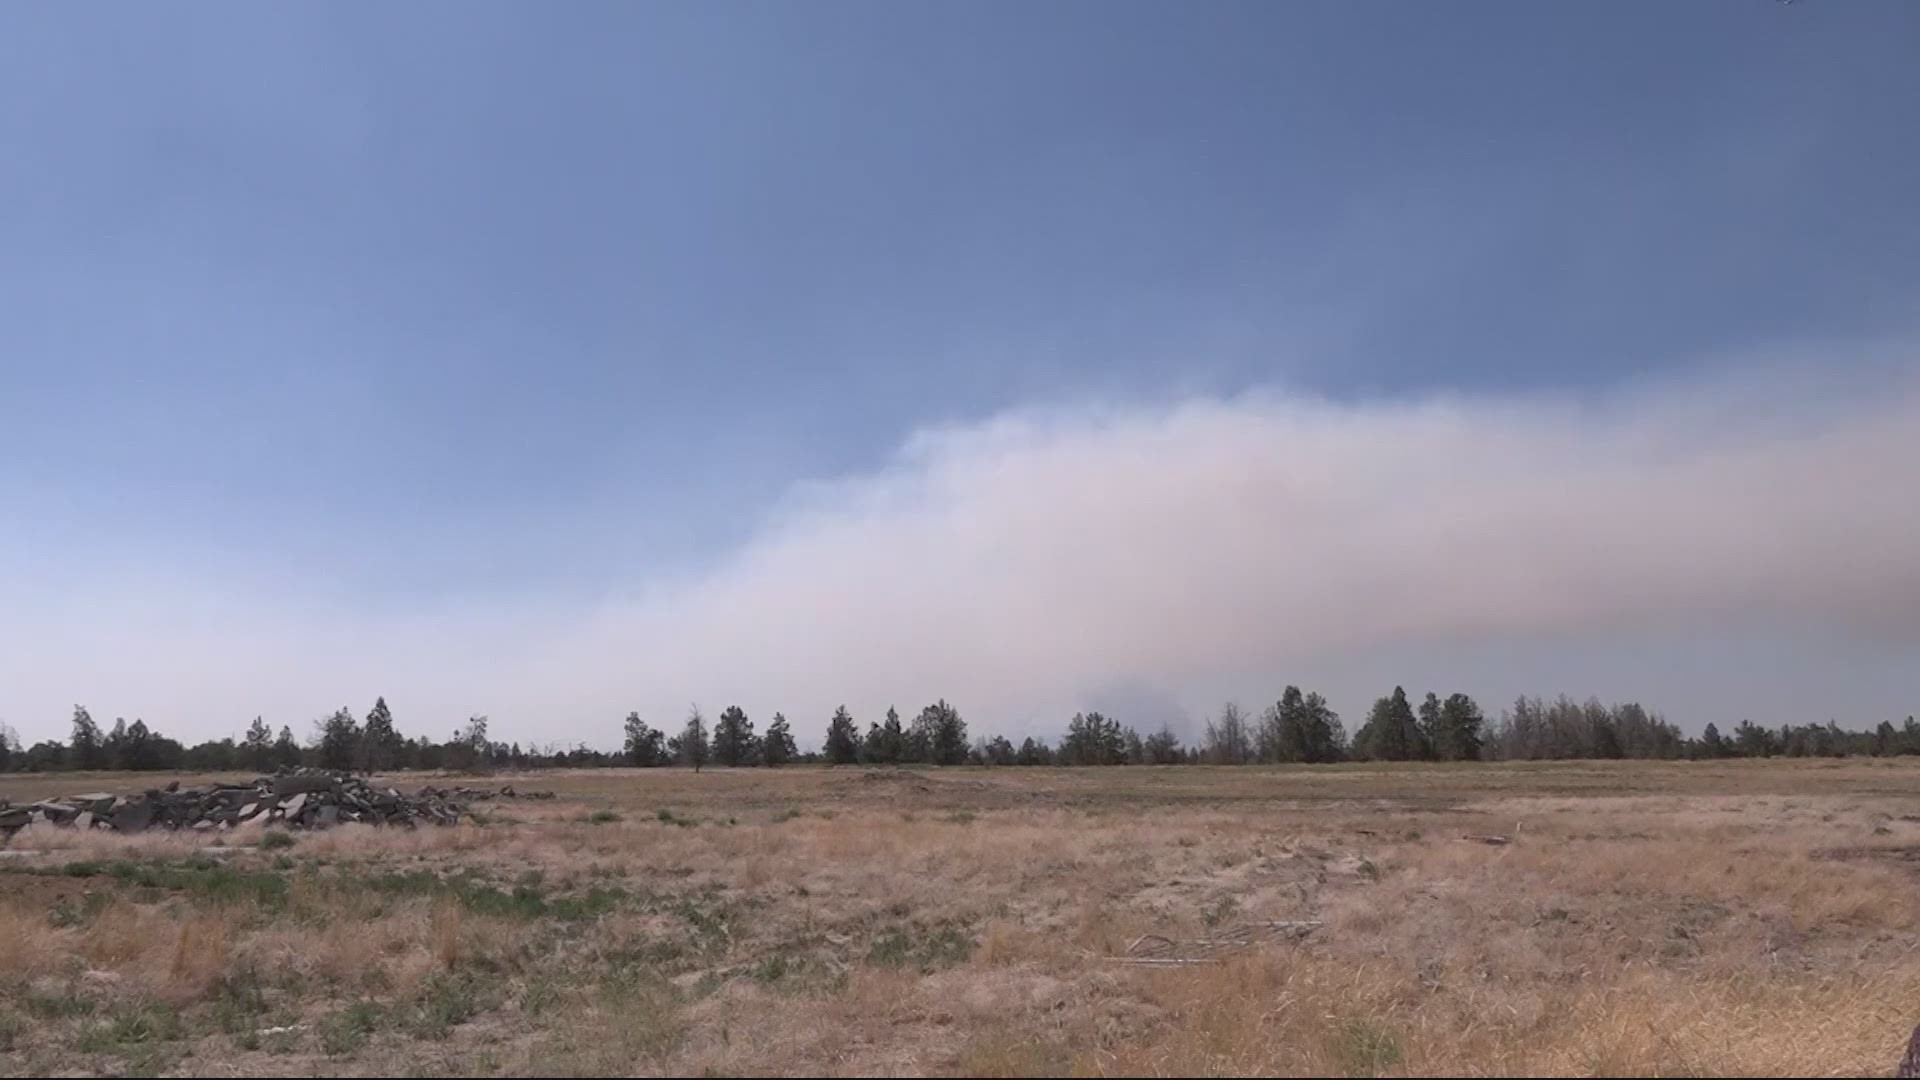 Go Now evacuation orders for the Grandview Fire are in effect.